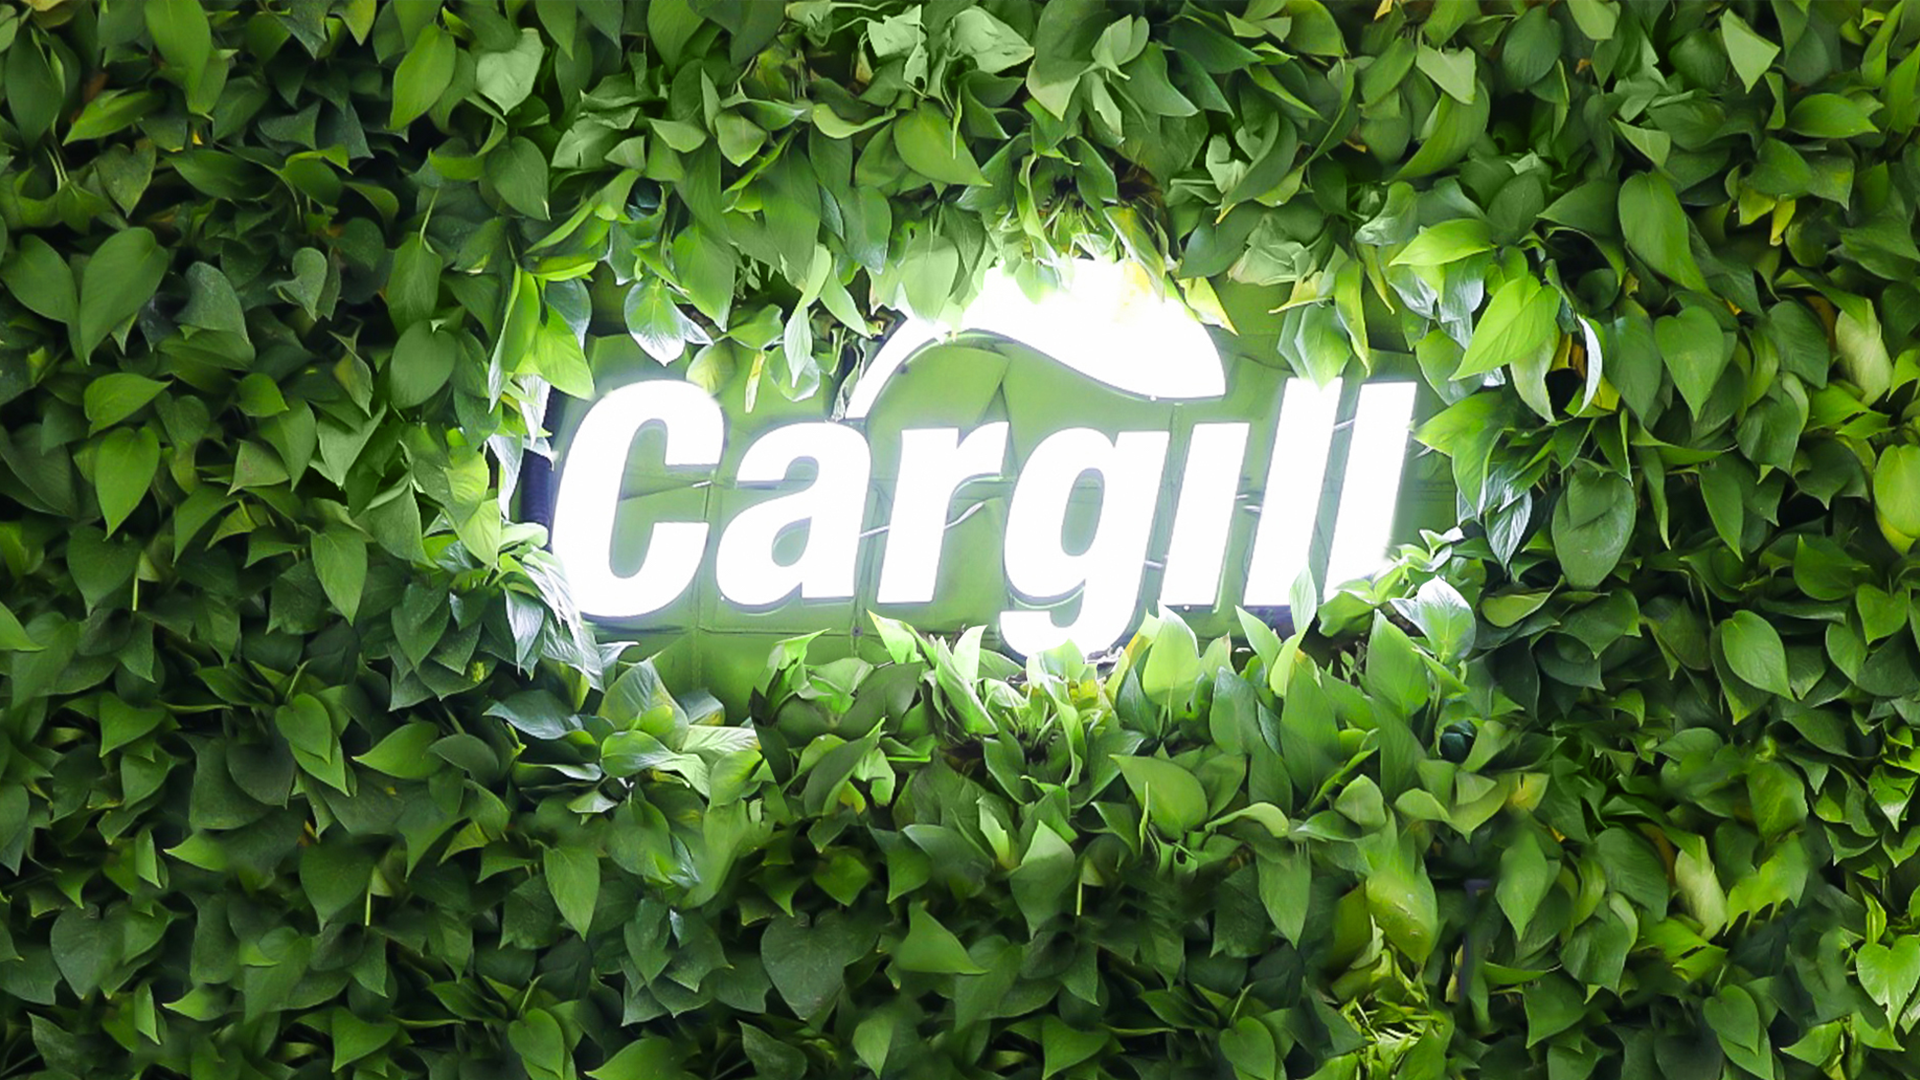 Multi-year contract signed between Cargill and H2 Green Steel